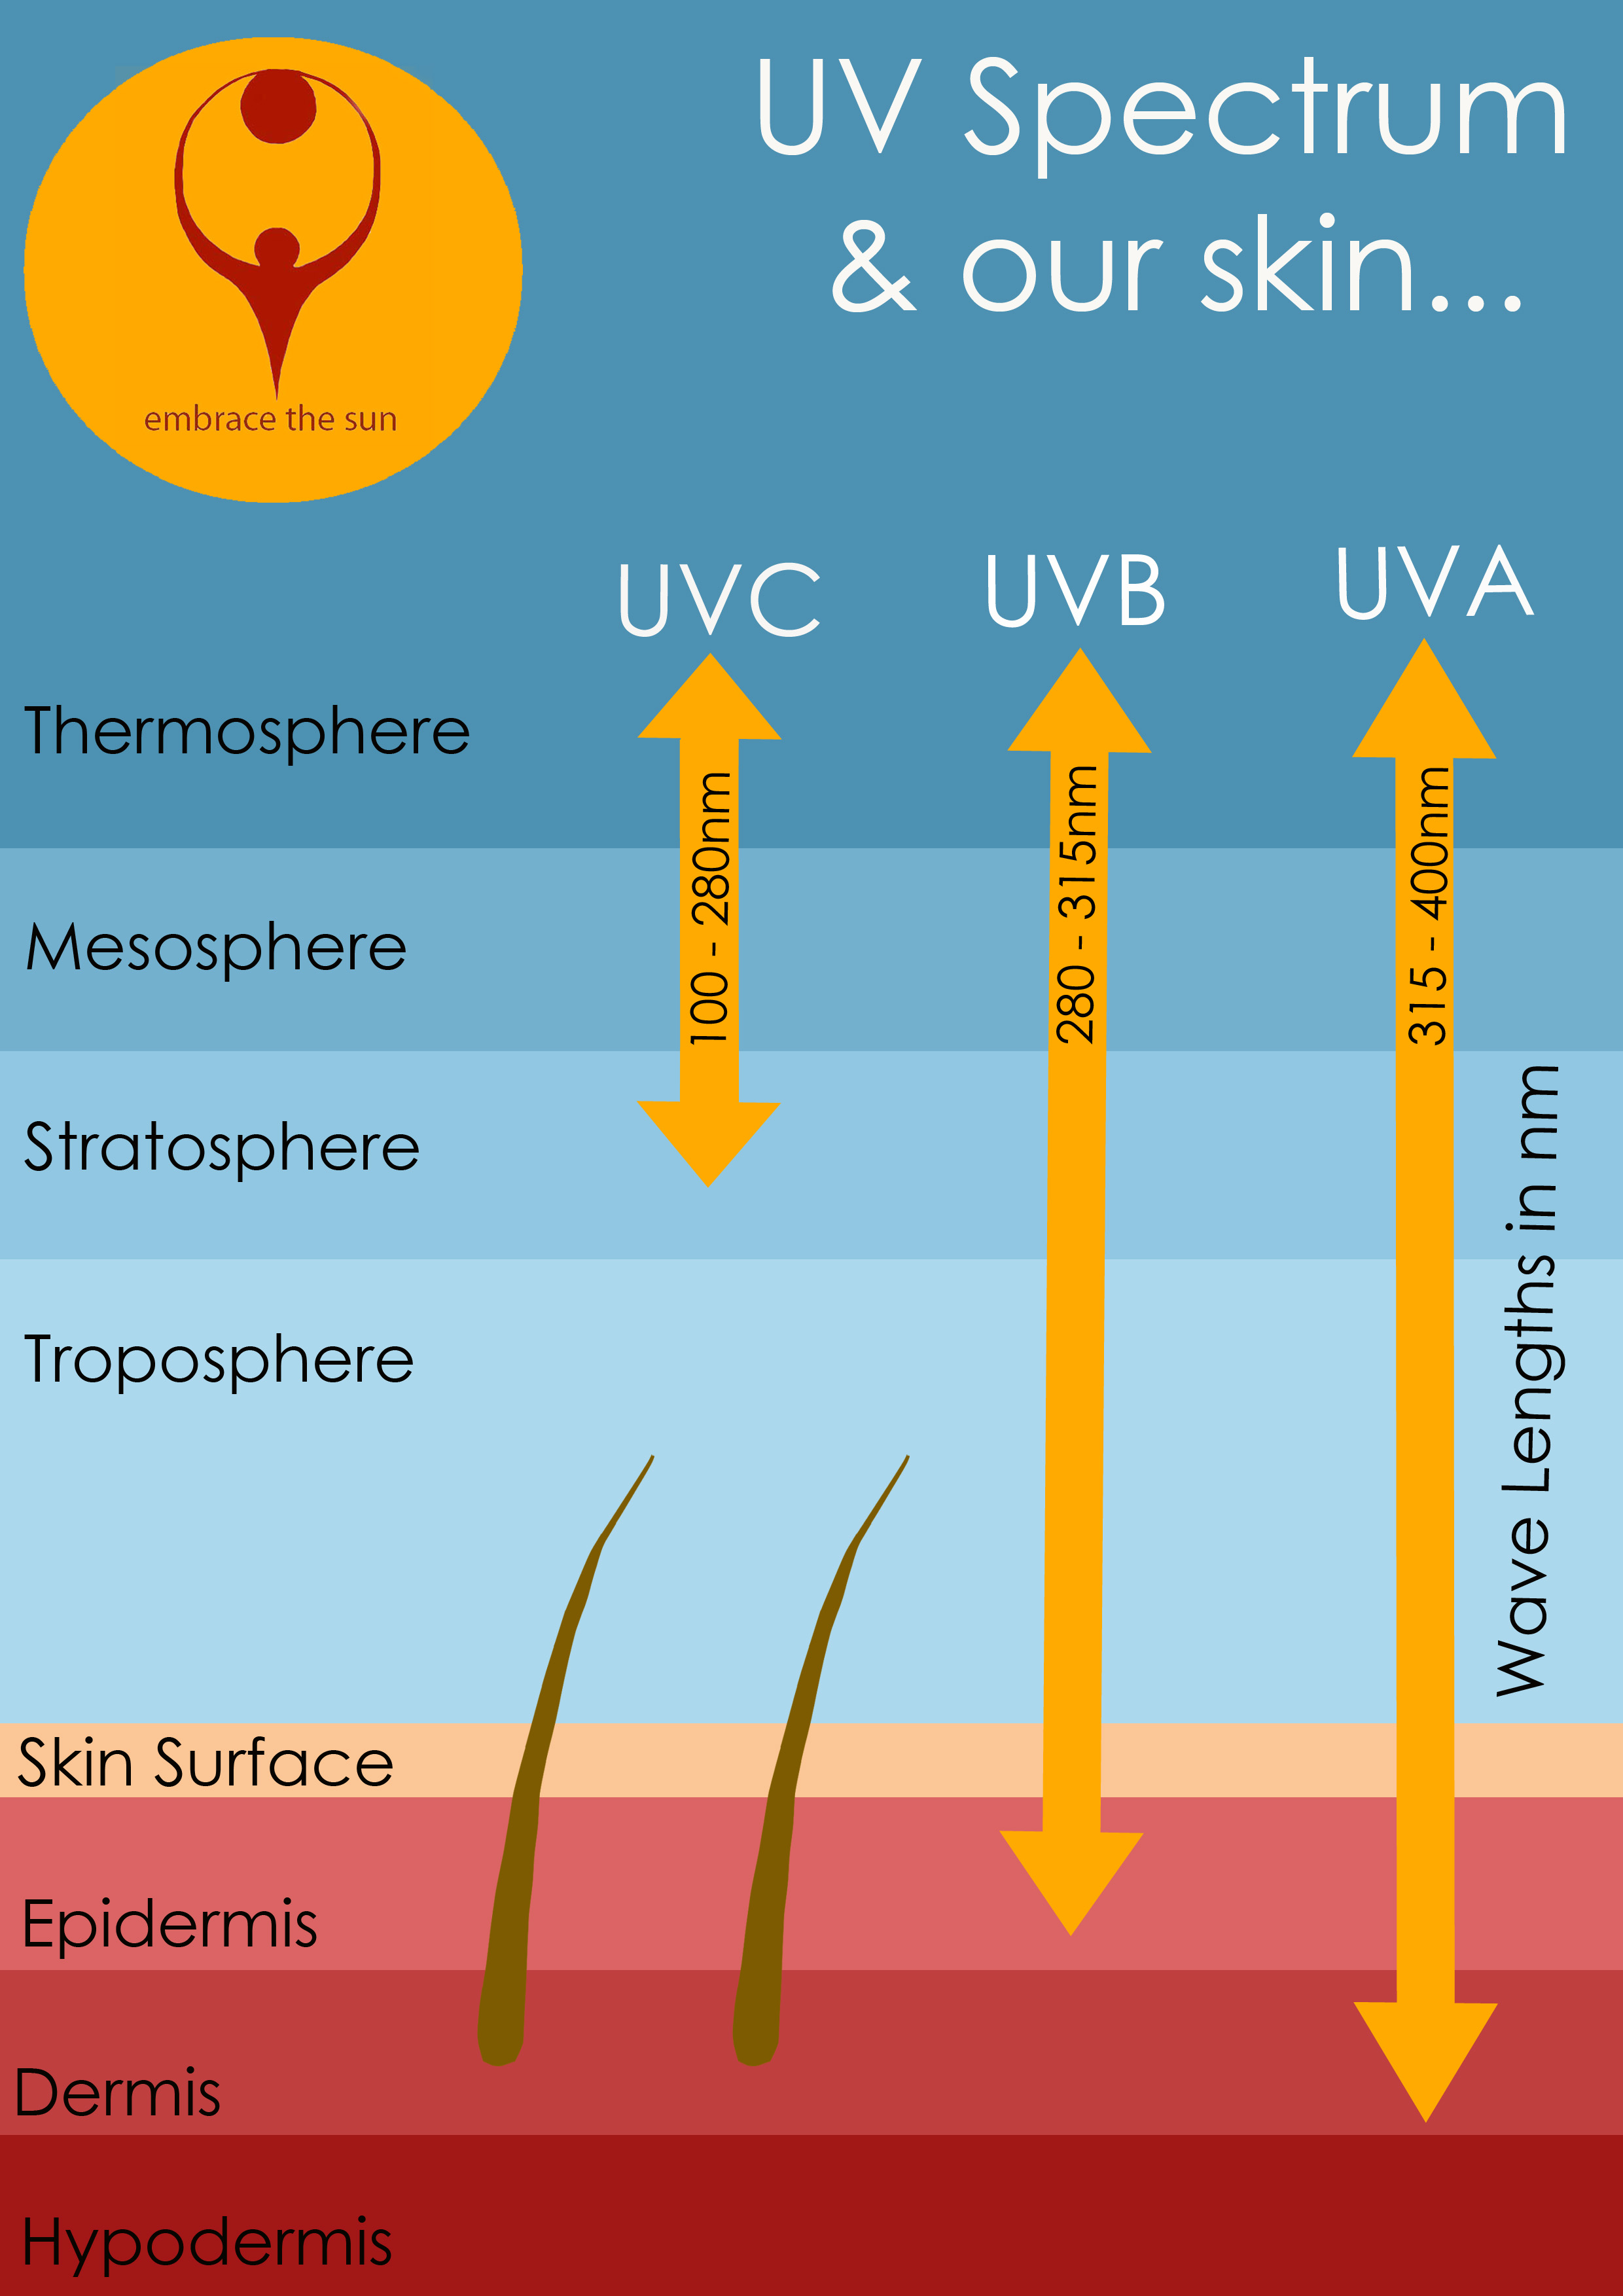 UV spectrum and our skin